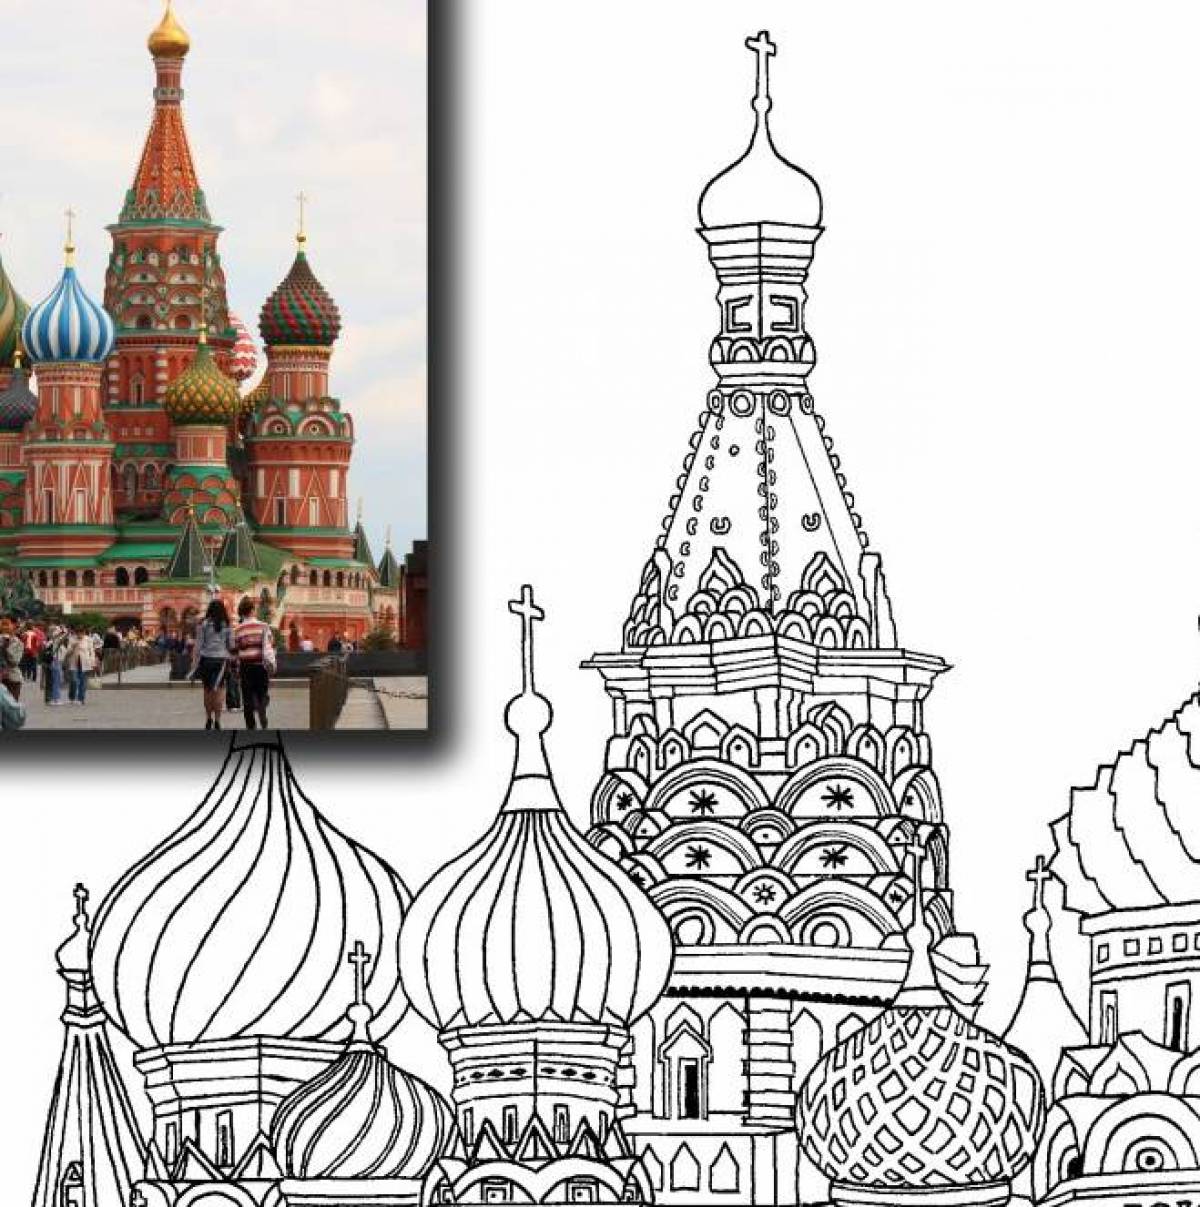 Perfect coloring of st basil's church